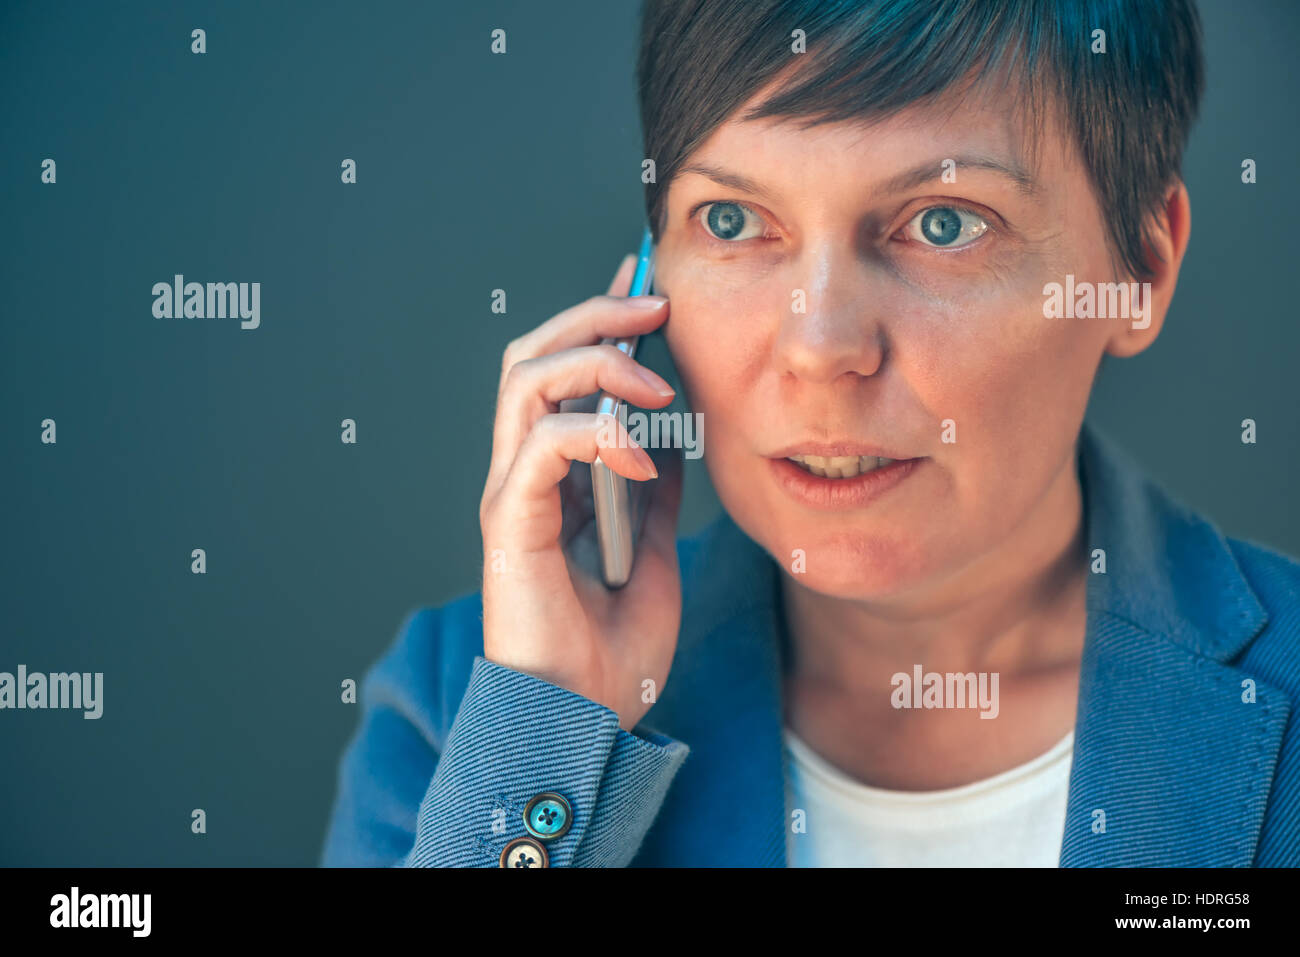 Business woman talking on mobile phone, close up headshot Stock Photo